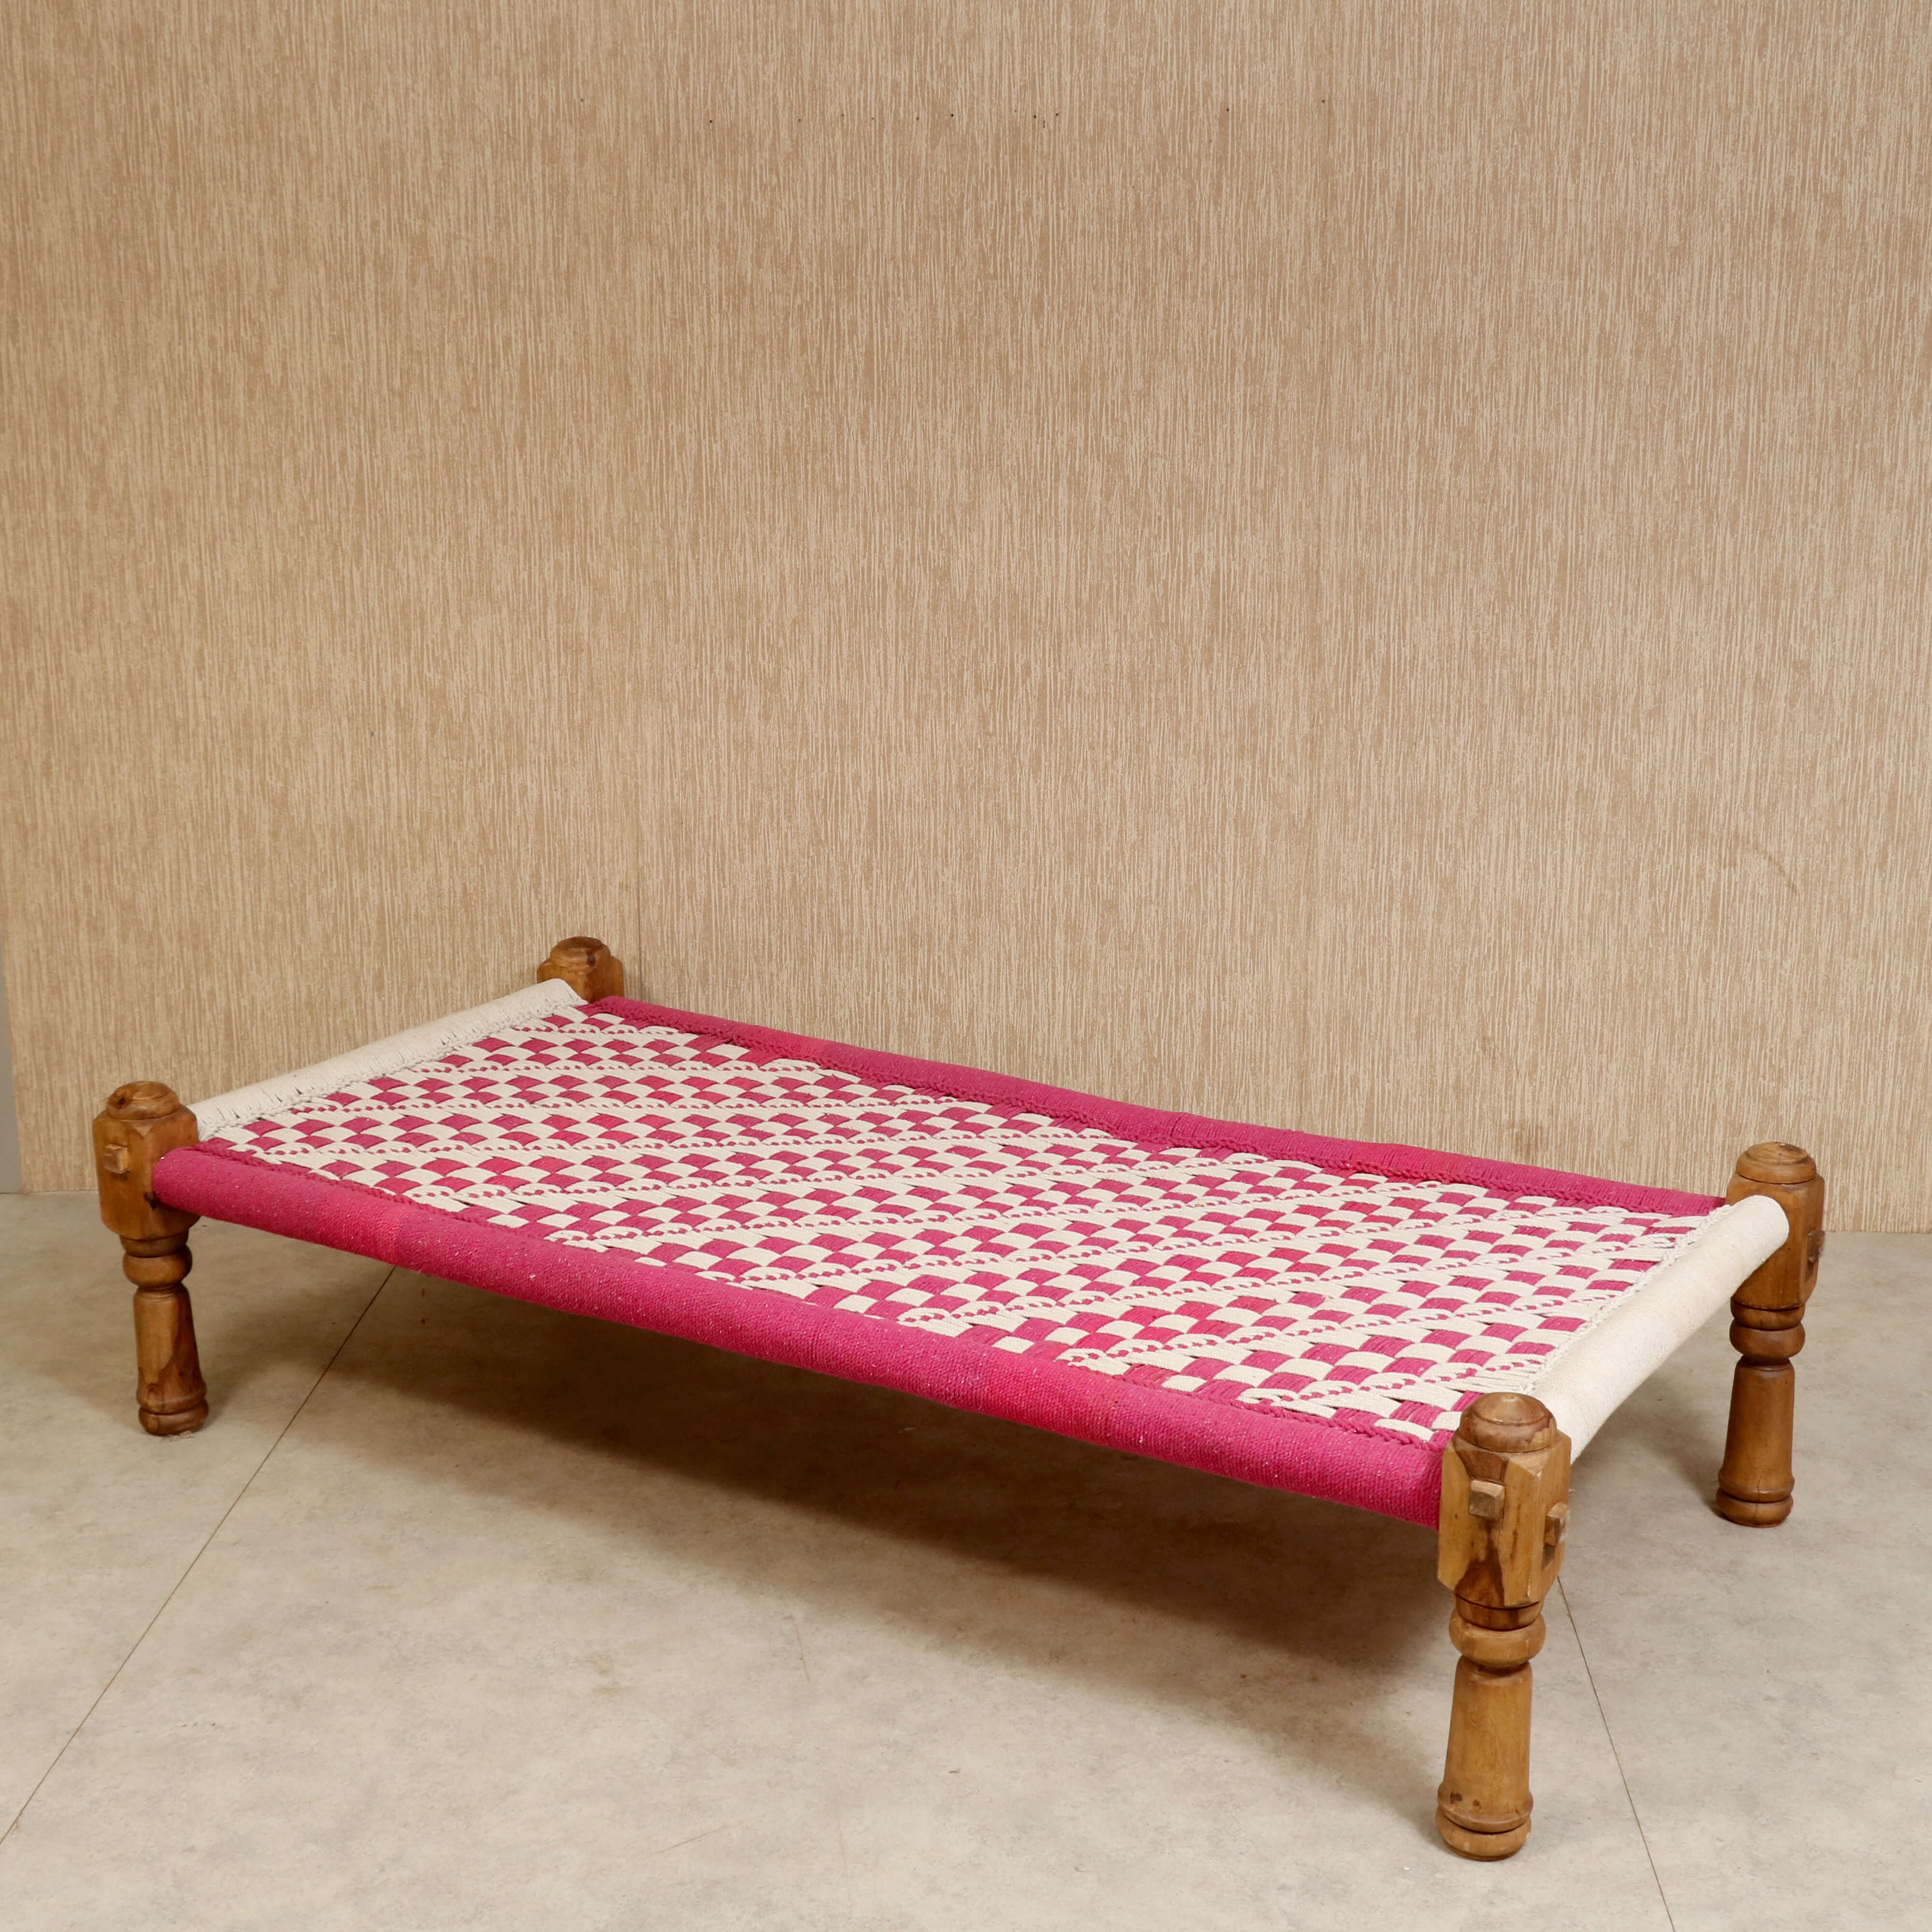 Traditional Wooden Day Bed Daybed